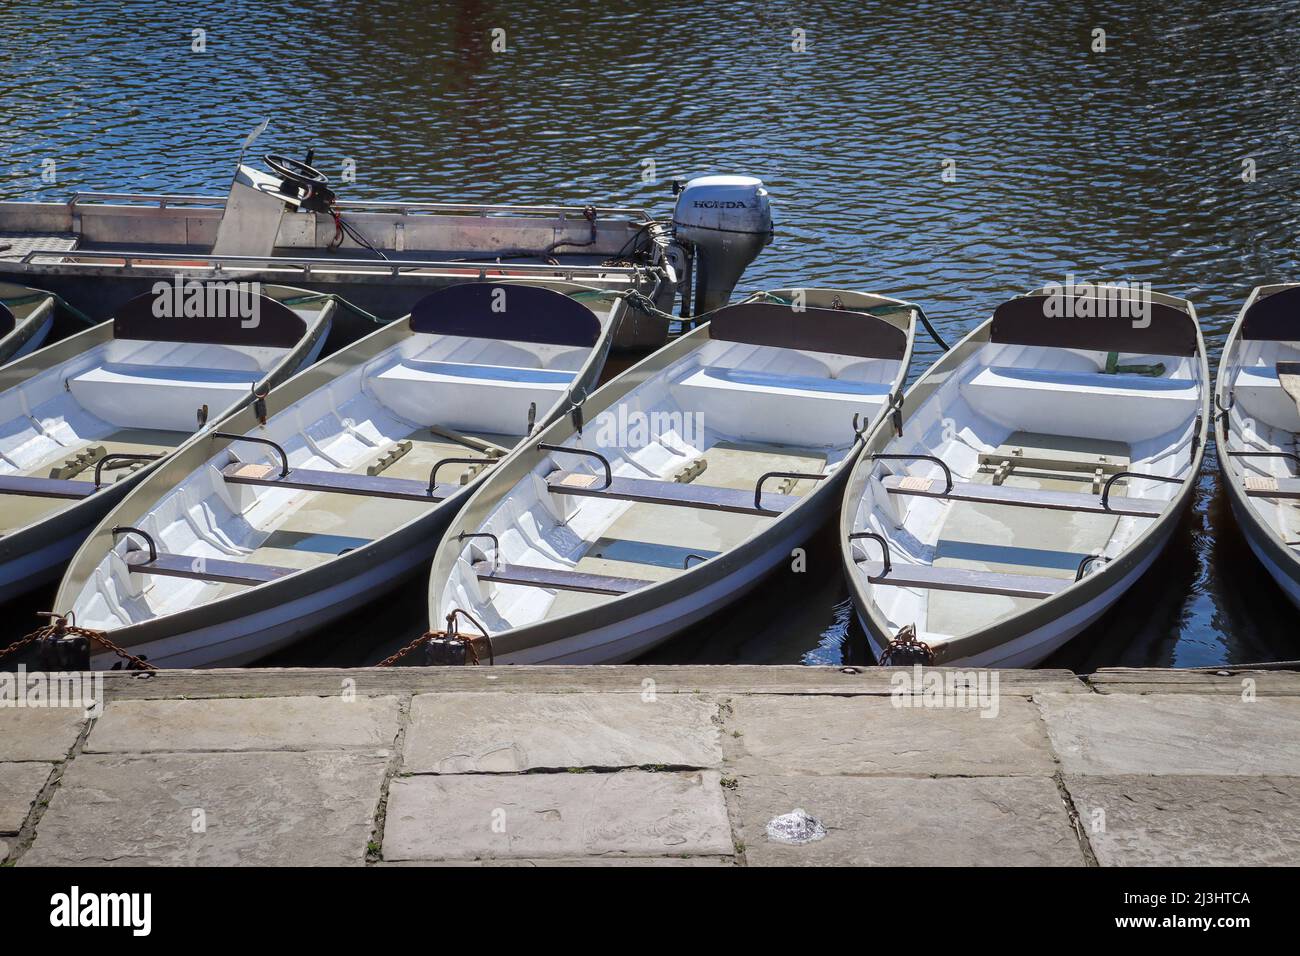 Boats for hire, row of boats on the River Dee, Chester Stock Photo